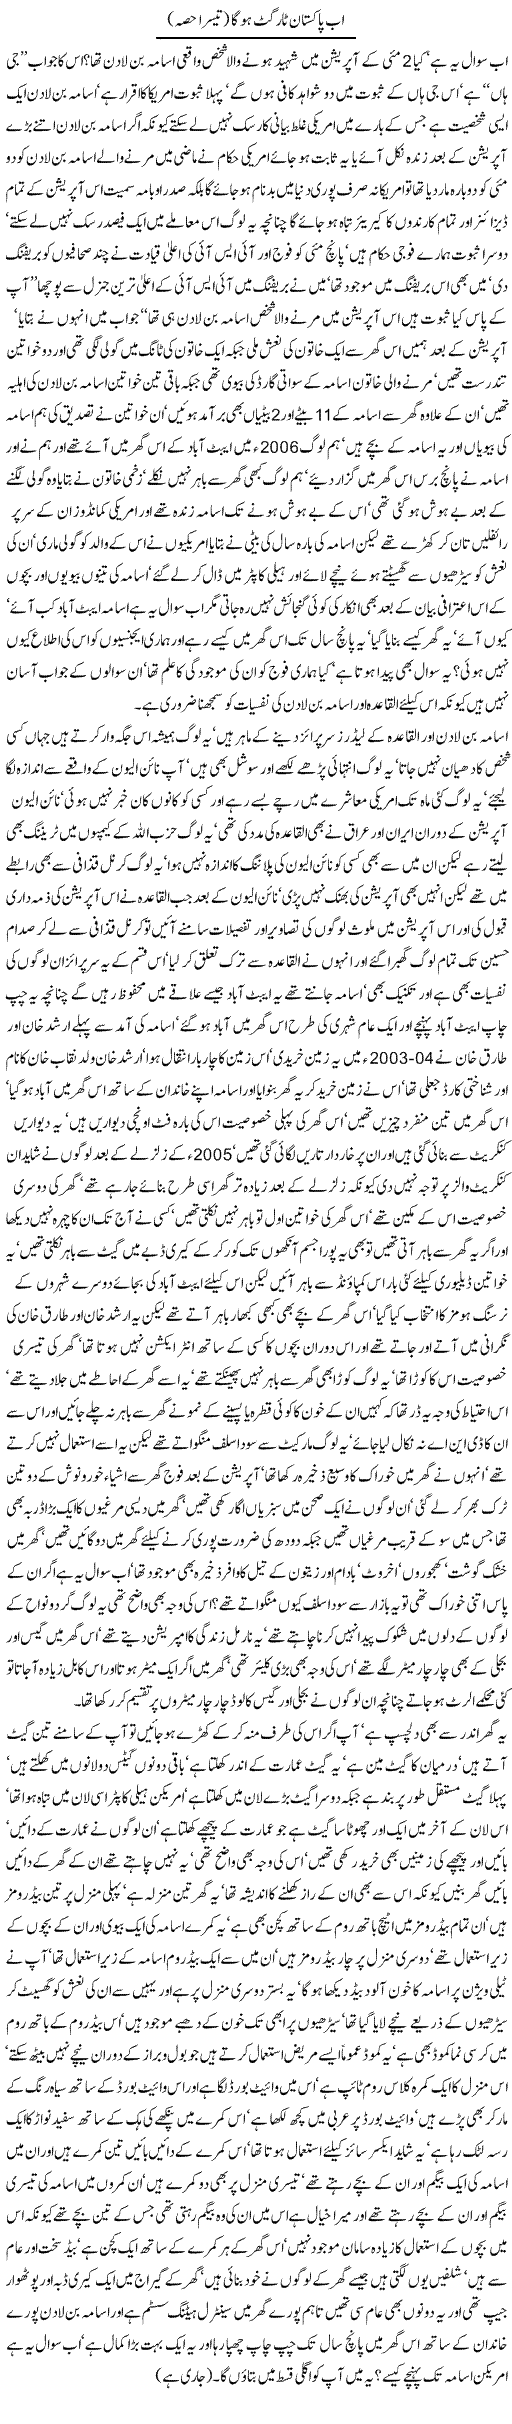 Now Pakistan Is Target Express Column Javed Chaudhry 8 May 2011